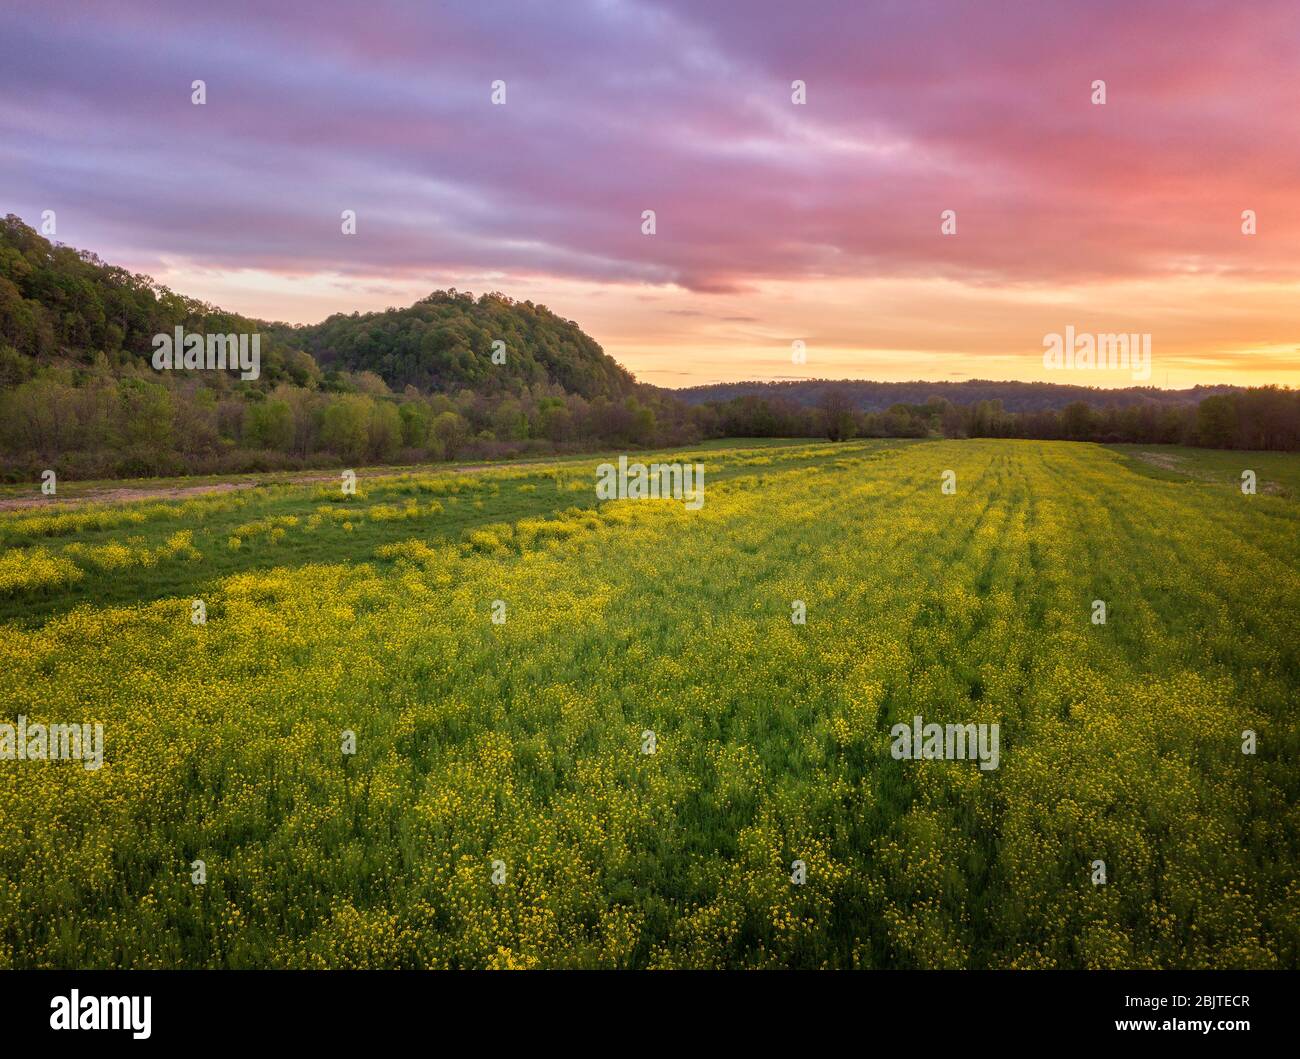 Yellow fields of wild mustard are in bloom above a Spring colorful sunset sky at Green Bottom, West Virginia. Stock Photo